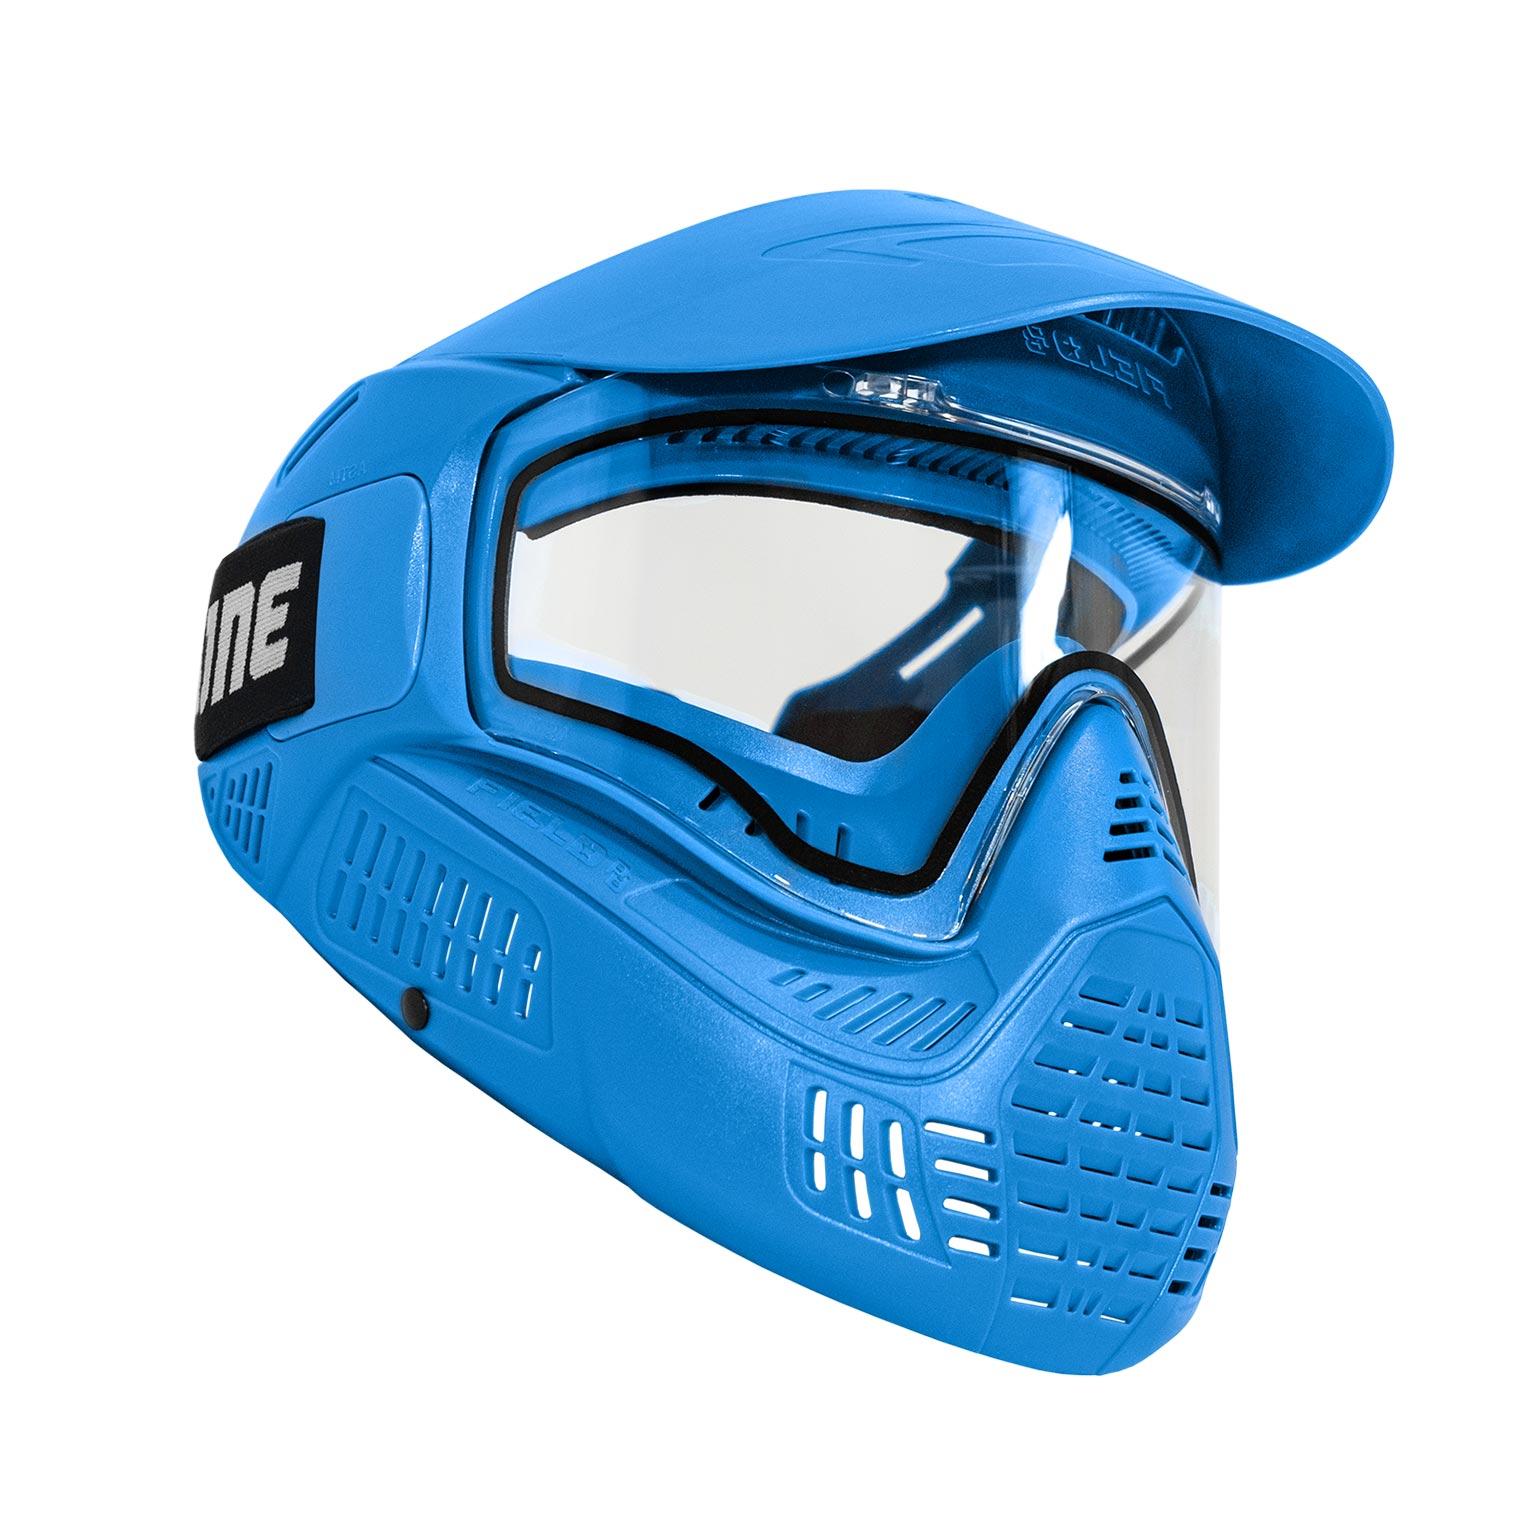 Goggle #ONE Thermal Blue V2 - Rubber Foam